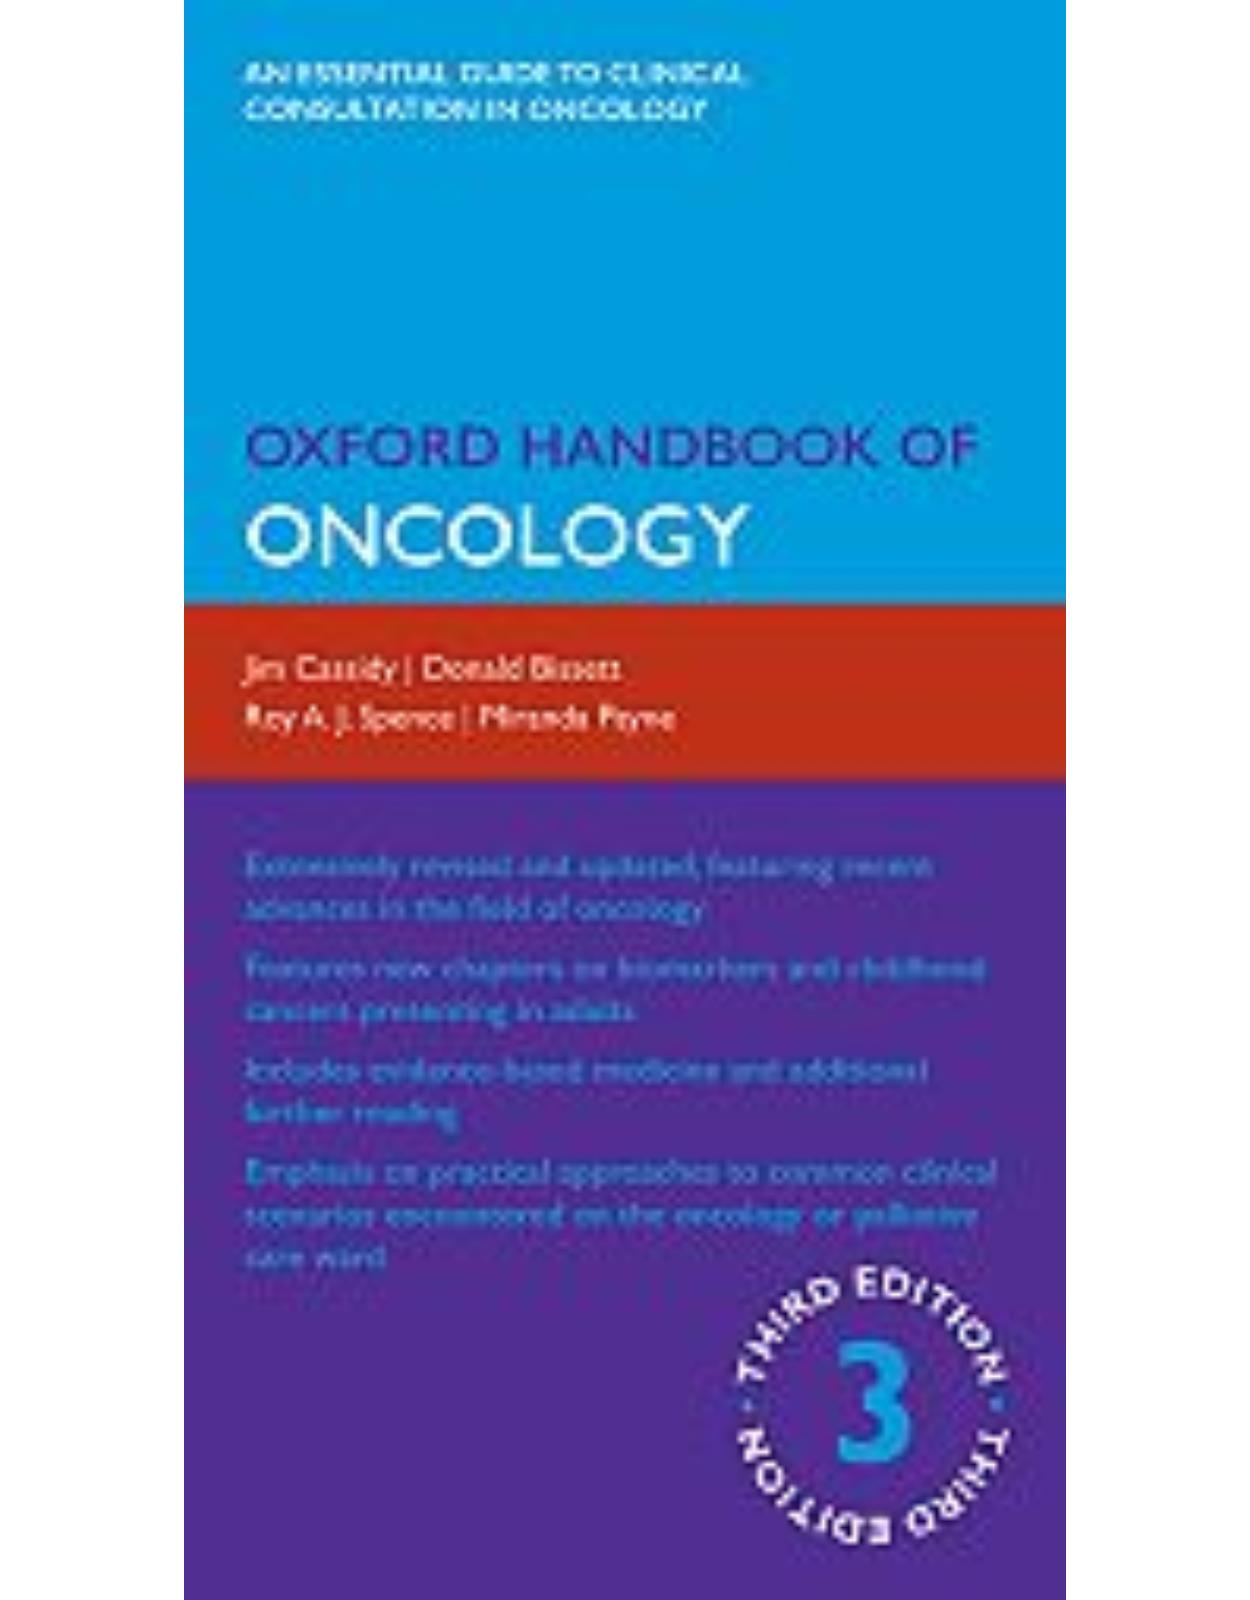 Oxford Handbook of Oncology Third Edition